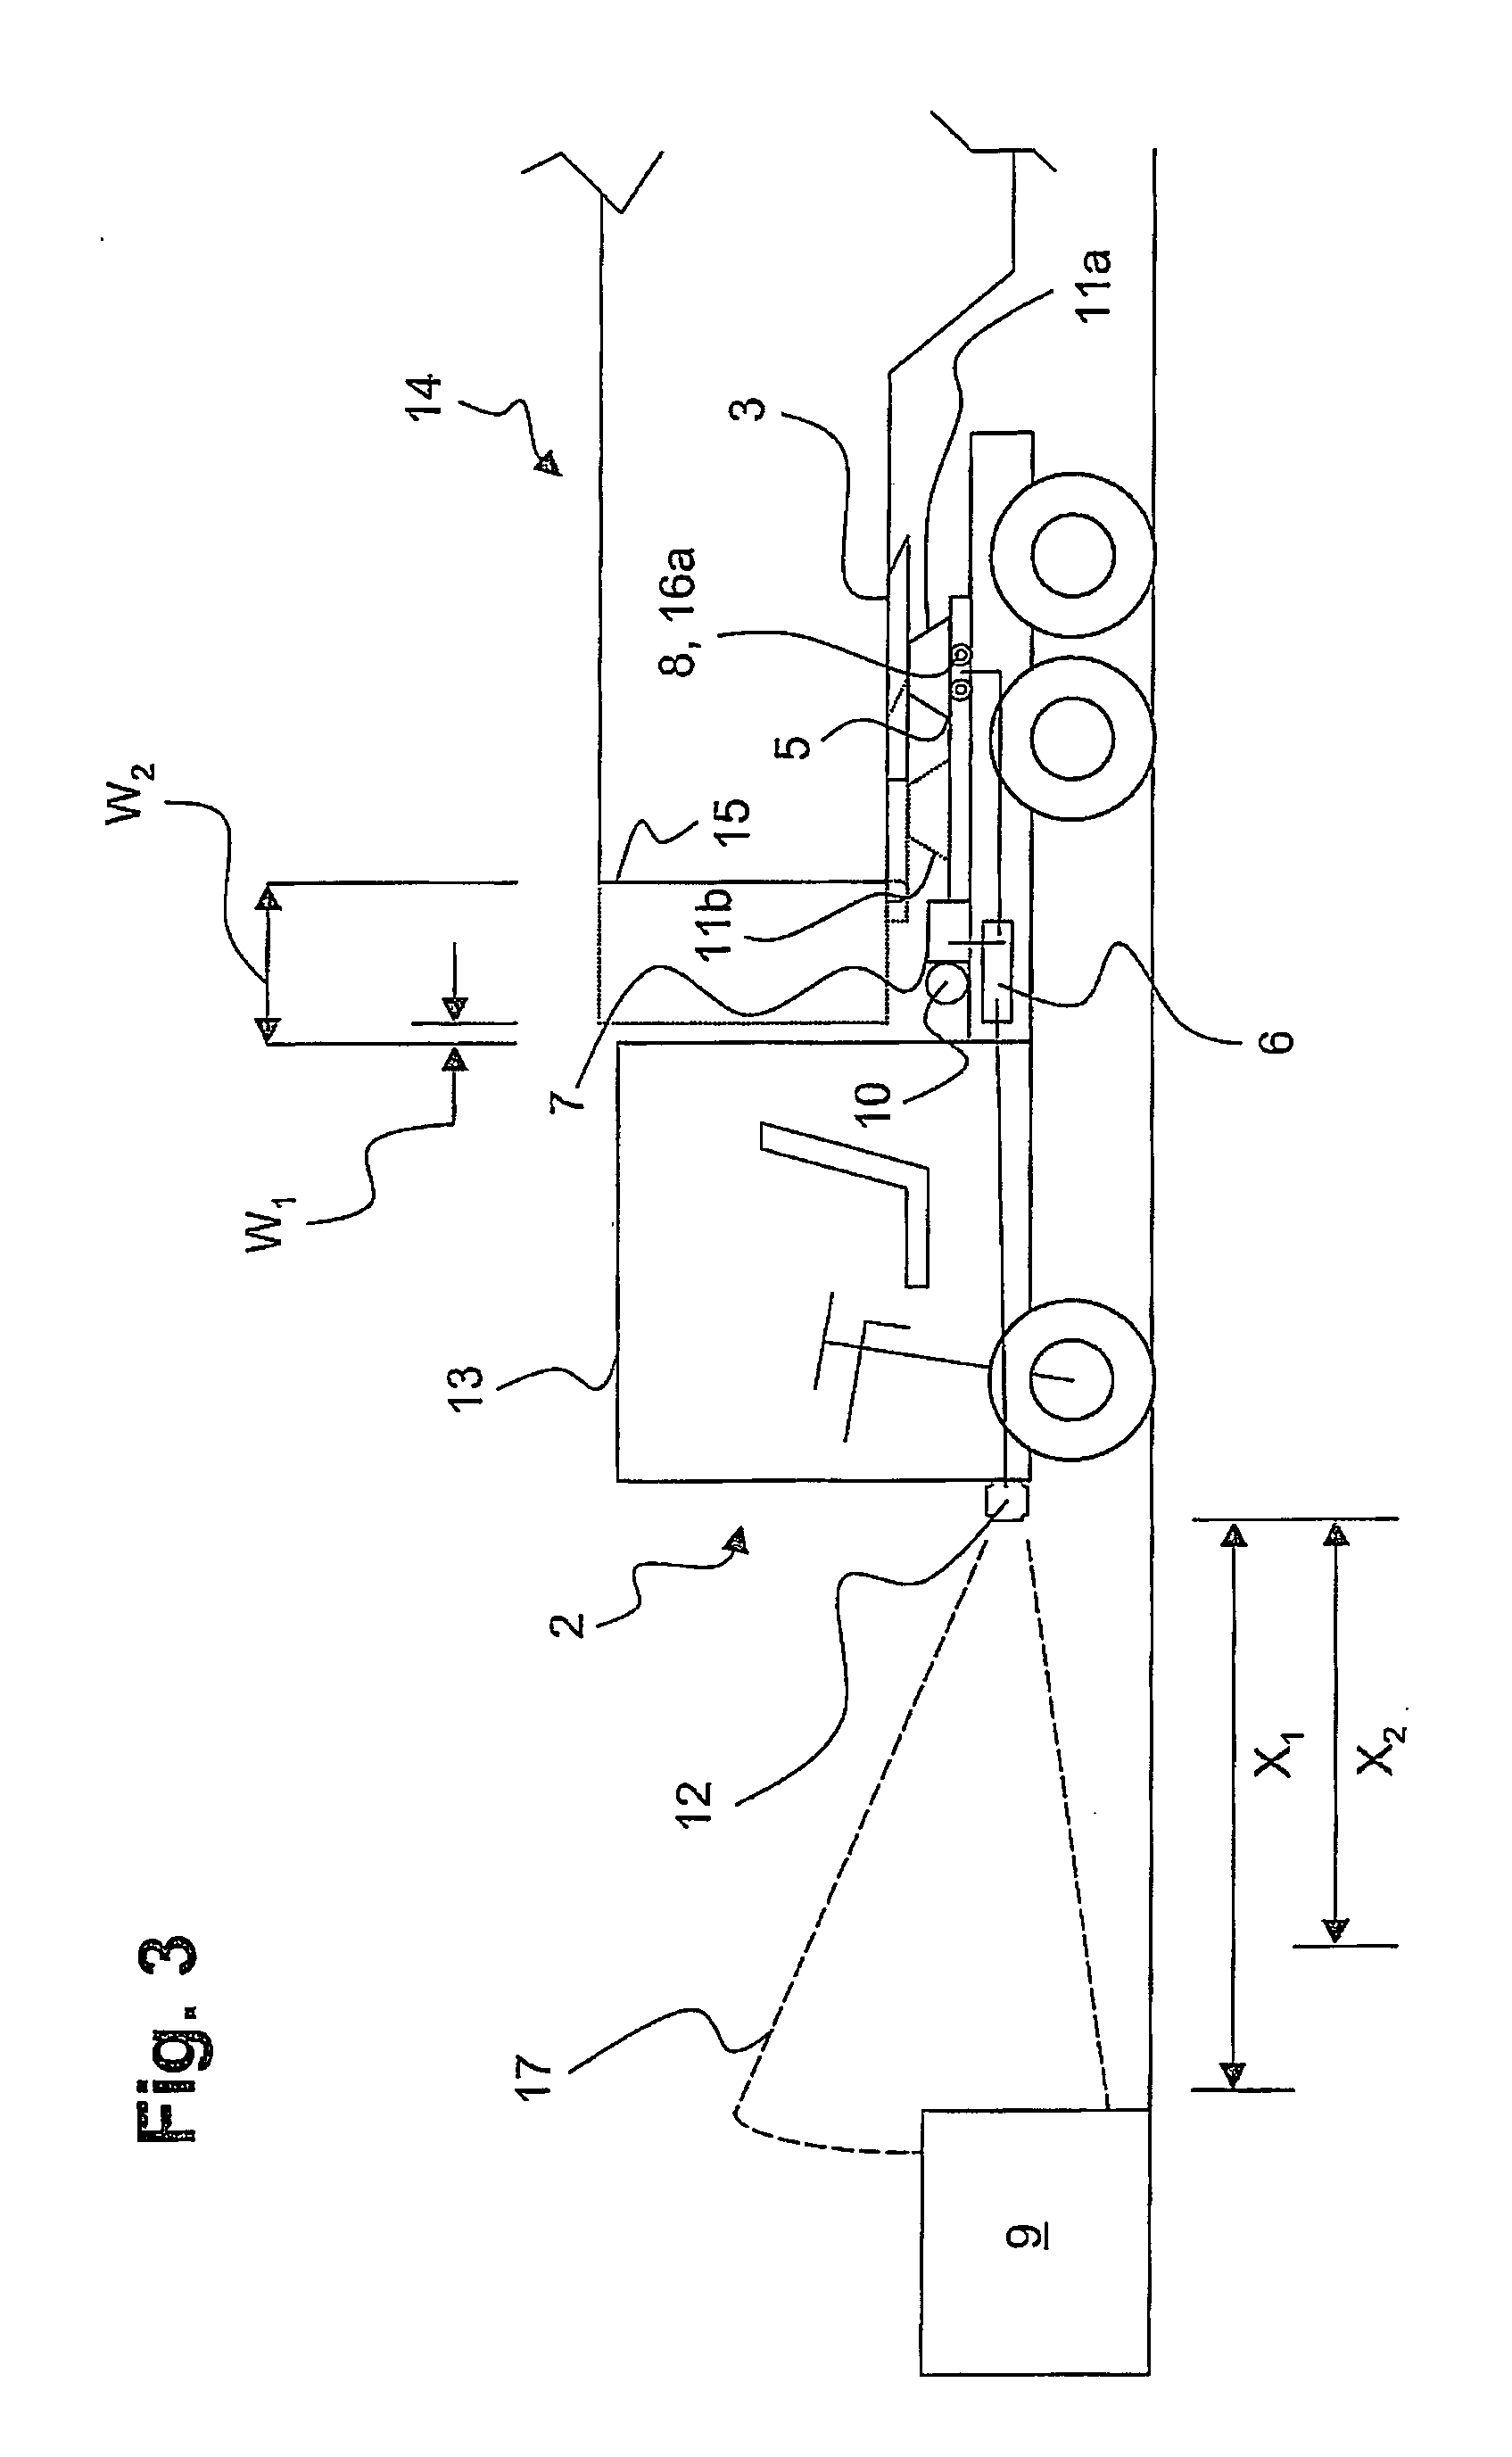 Method and control system for a displacement device, with distance measurement in order to detect obstacles